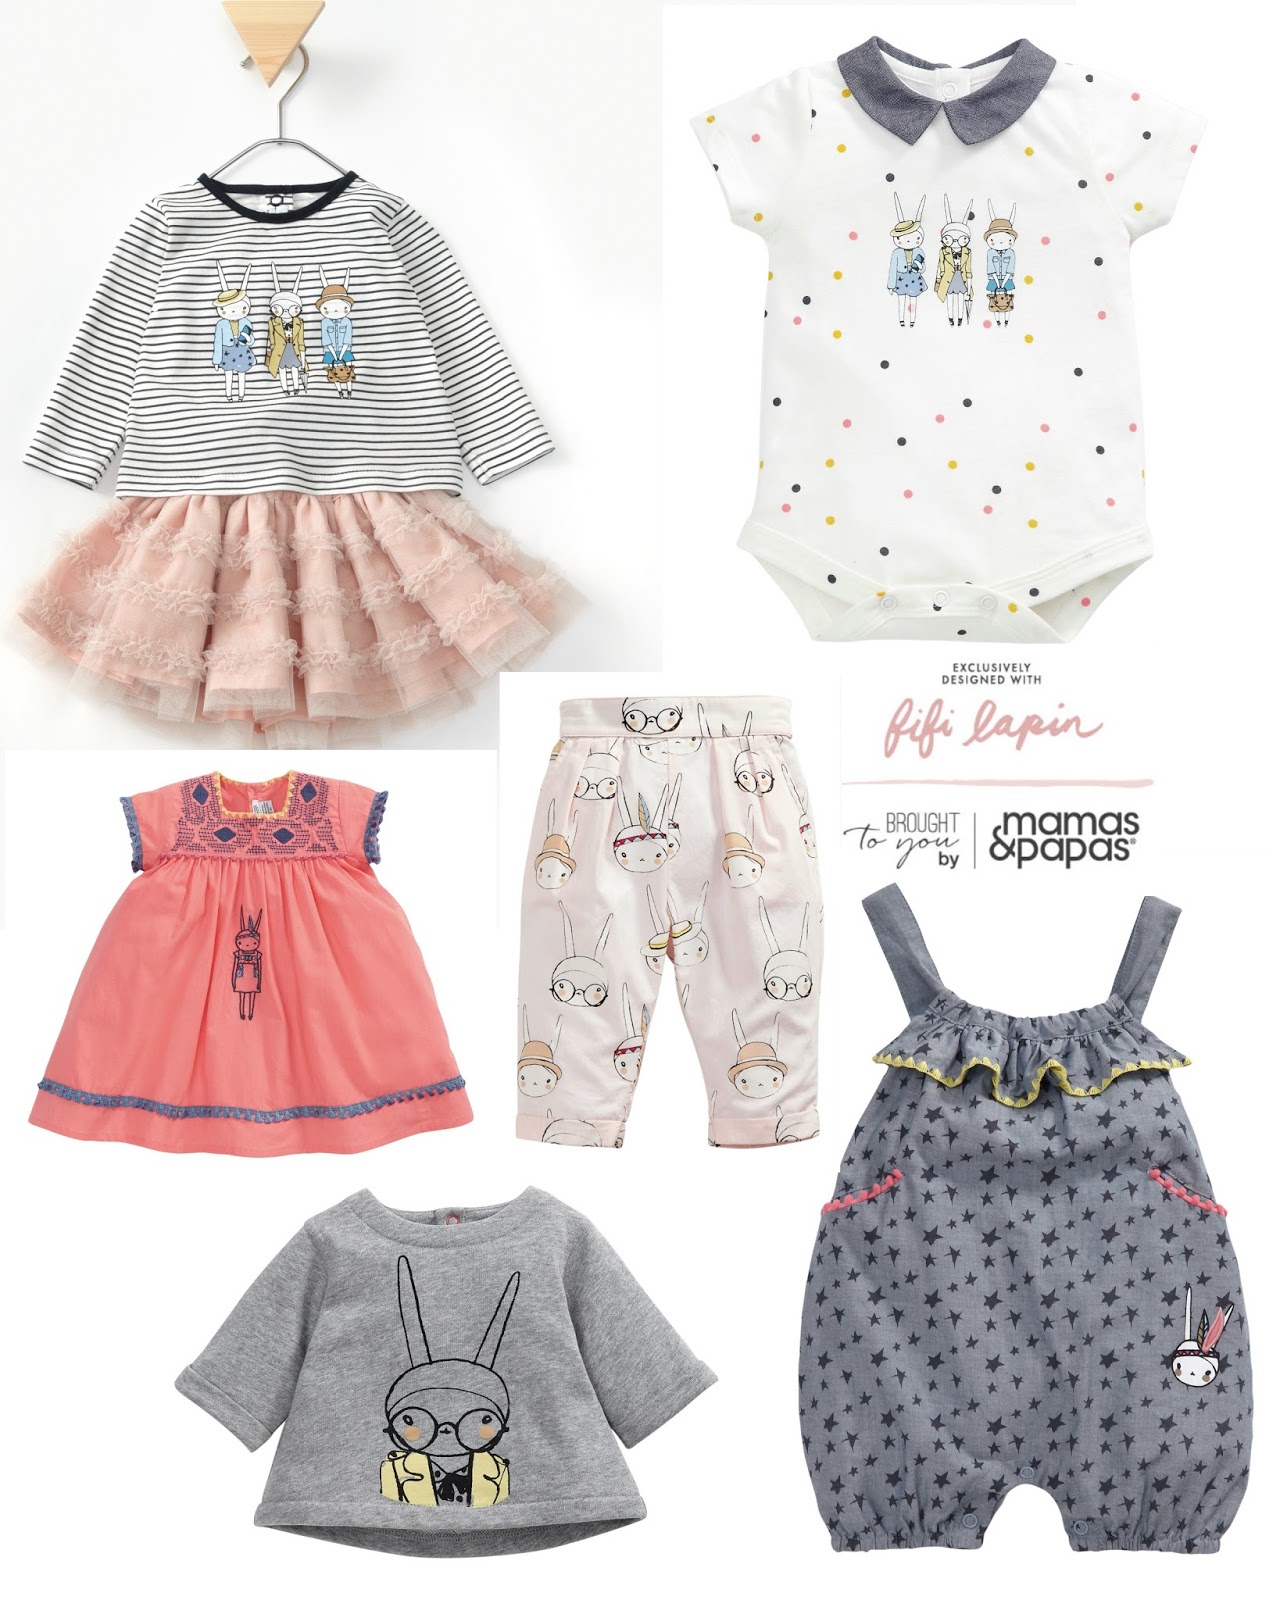 V. I. BUYS: Fashion Finder - the exclusive kids collection coming soon that you won't want to miss!